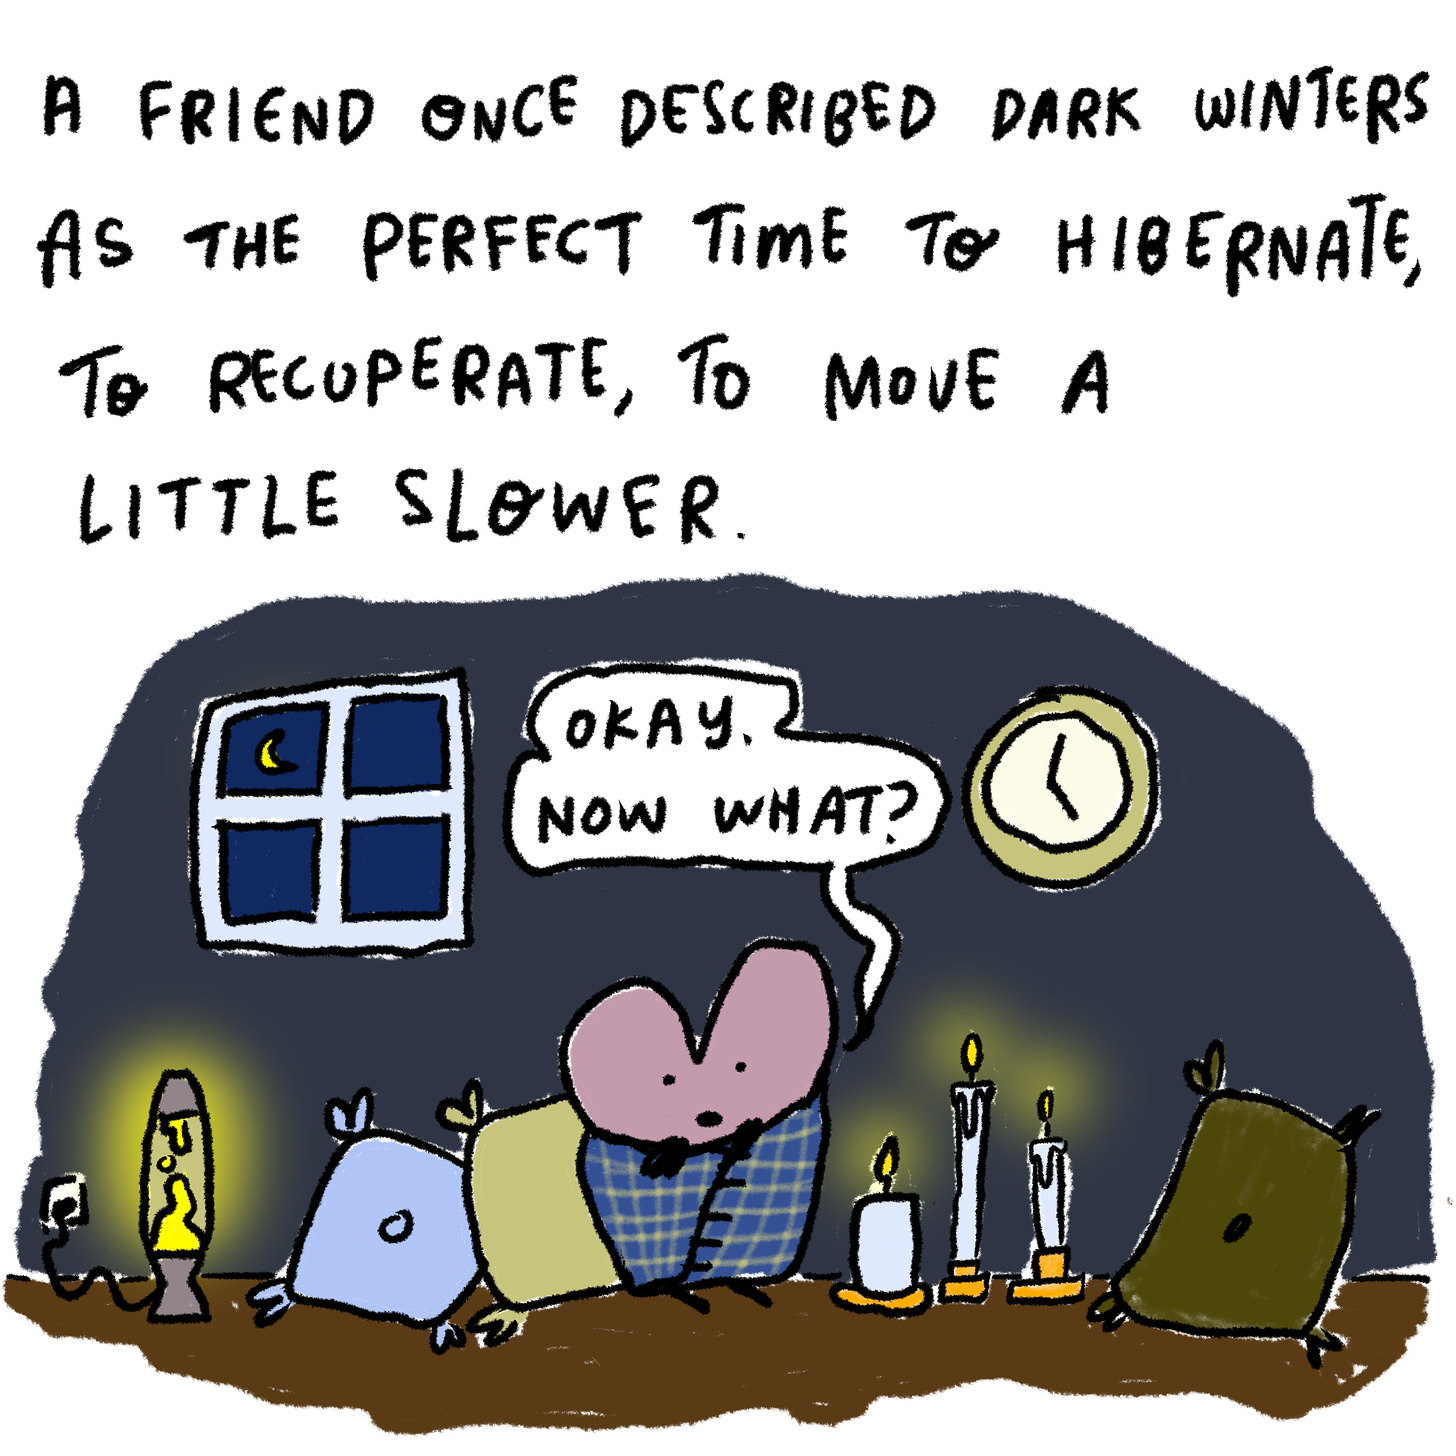  A friend once described the dark winter as the perfect time to hibernate, to recuperate, to move a little slower. 